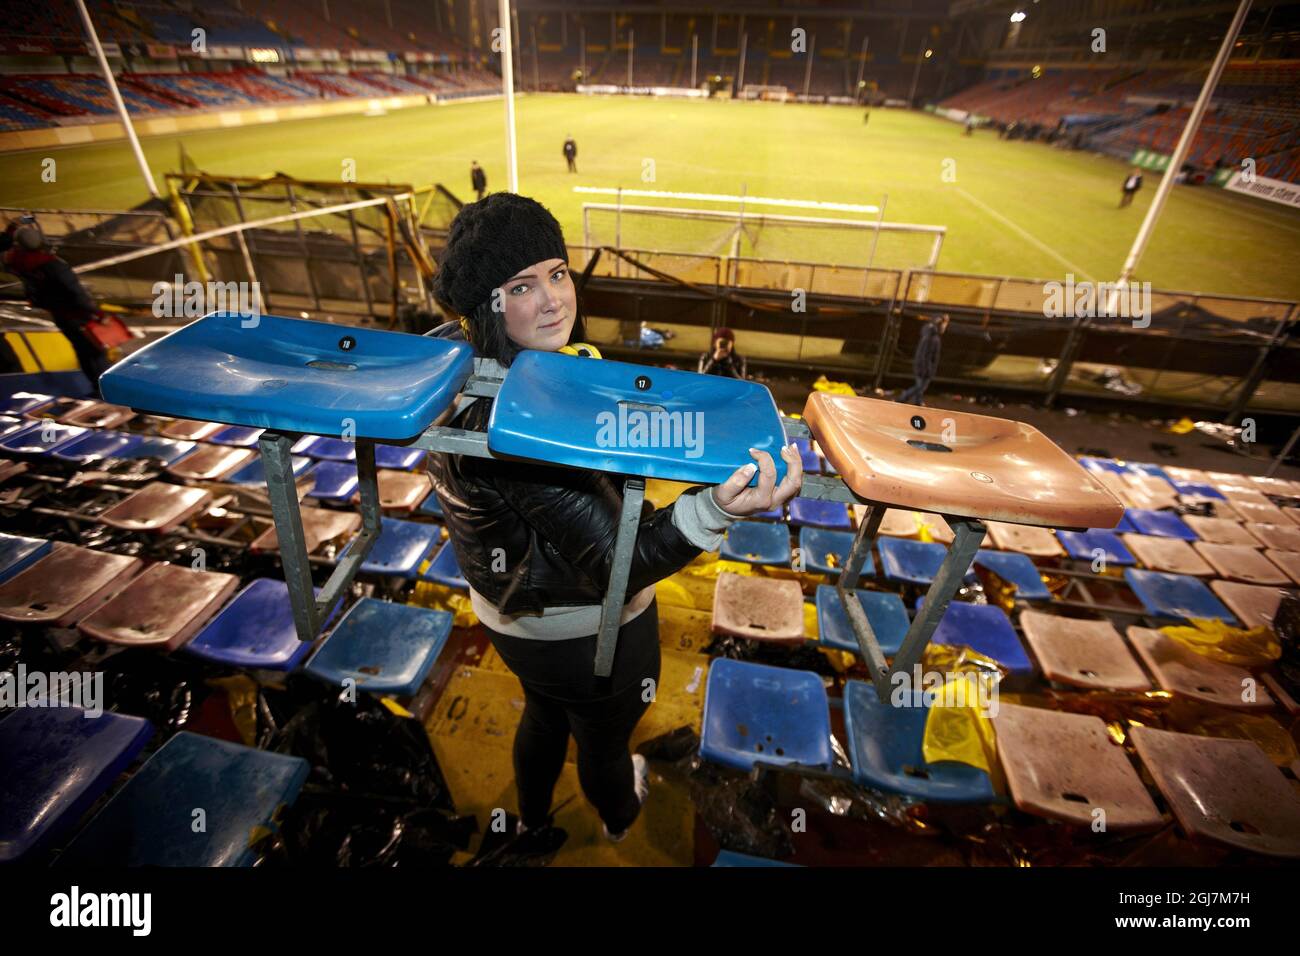 STOCKHOLM 20121122 AIK supporter Josefin carries home the seat she has been sitting on since she was a child after AIK played their last soccer match on RÃ¥sunda stadium on Sunday November 22 2012.. Swedish football fans descended upon the RÃ¥sunda stadium in northern Stockholm to take home souvenirs before the grounds are officially demolished. Foto: Fredrik Persson / SCANPIX / Kod 75906 Stock Photo